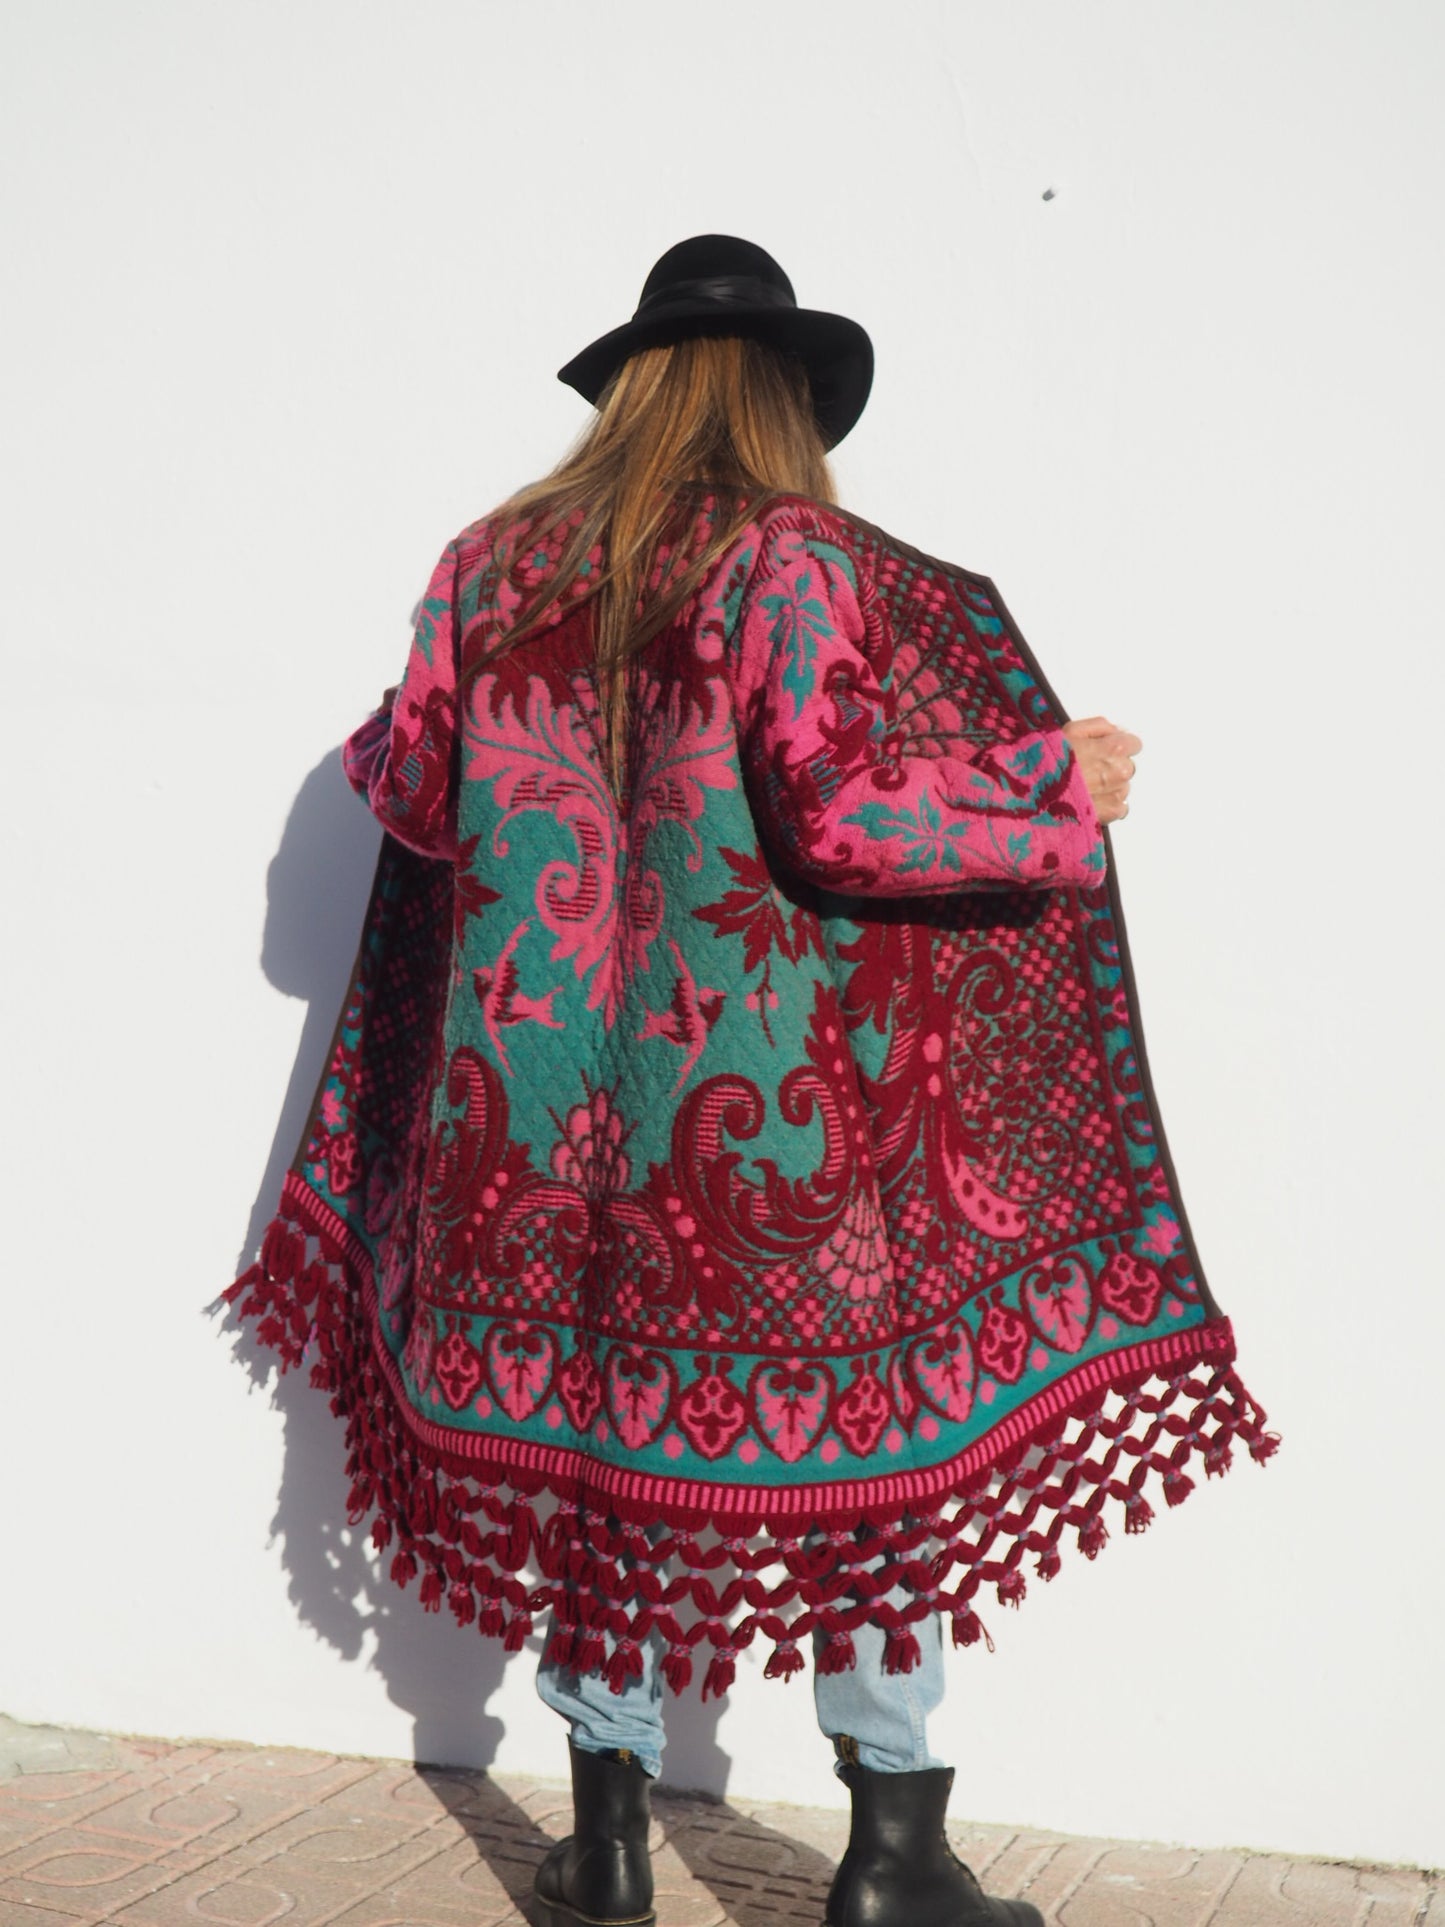 Amazing vintage woven tapestry jacket with insane oversize tassel trim up-cycled by Vagabond Ibiza